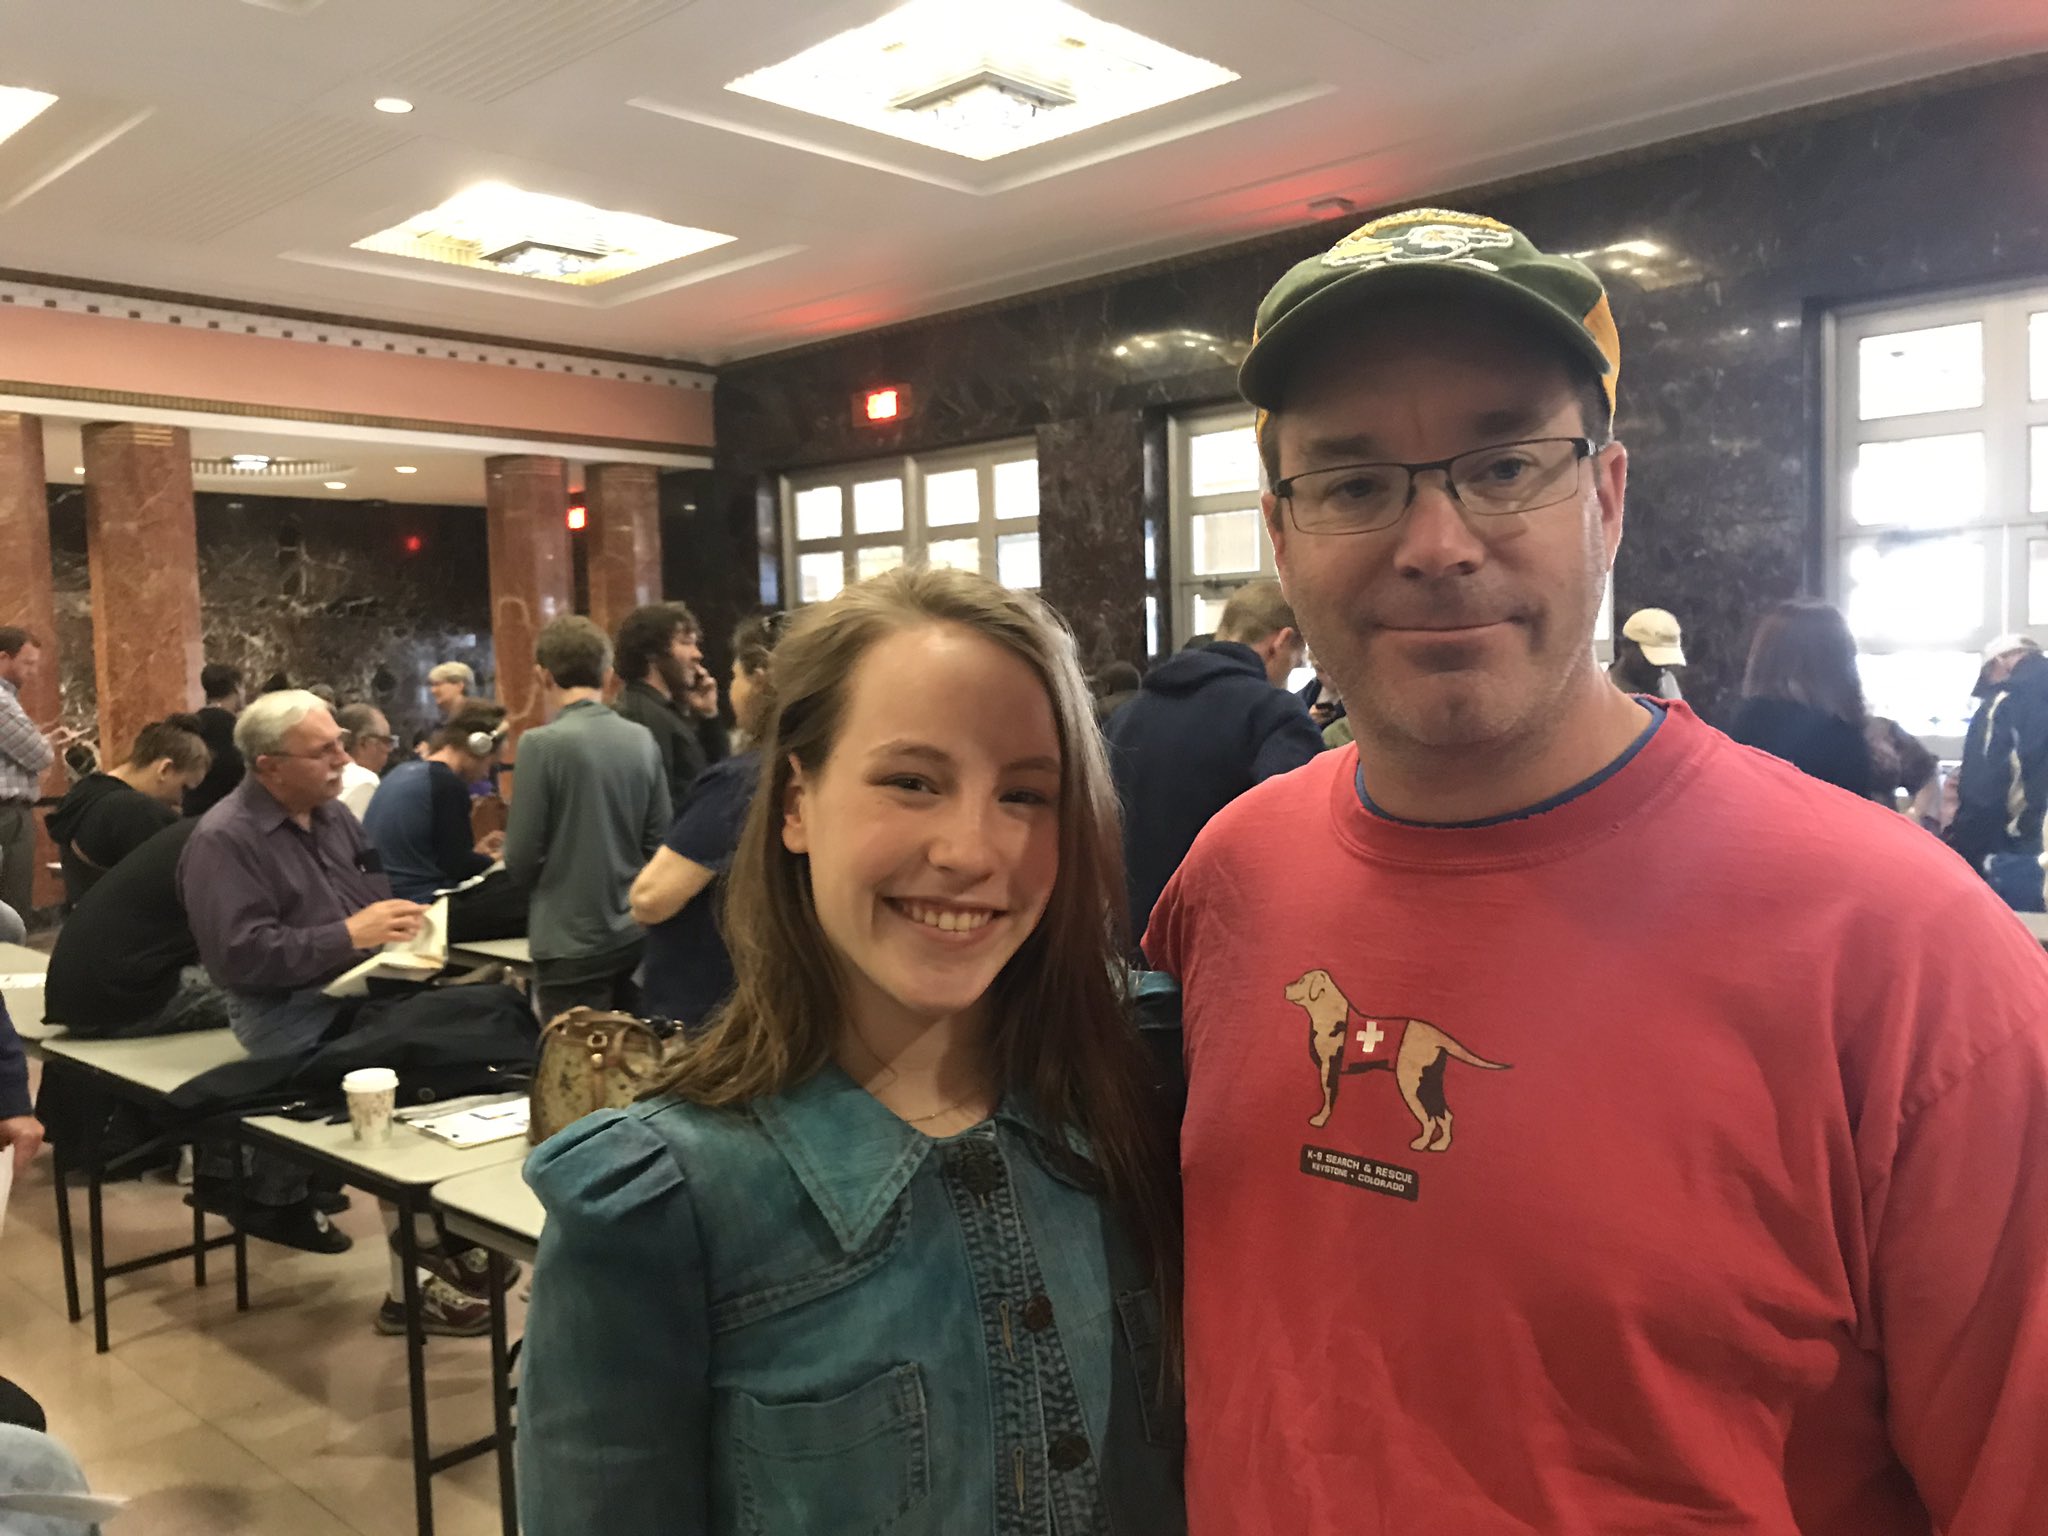 Shredded Pornografi Bunke af Katy Bergen on Twitter: "I'm at the KC Music Hall, hanging out with  @HamiltonMusical fans hoping to get limited tickets for the #KC production.  Meet Lolly and Tim Hindman, who drove this